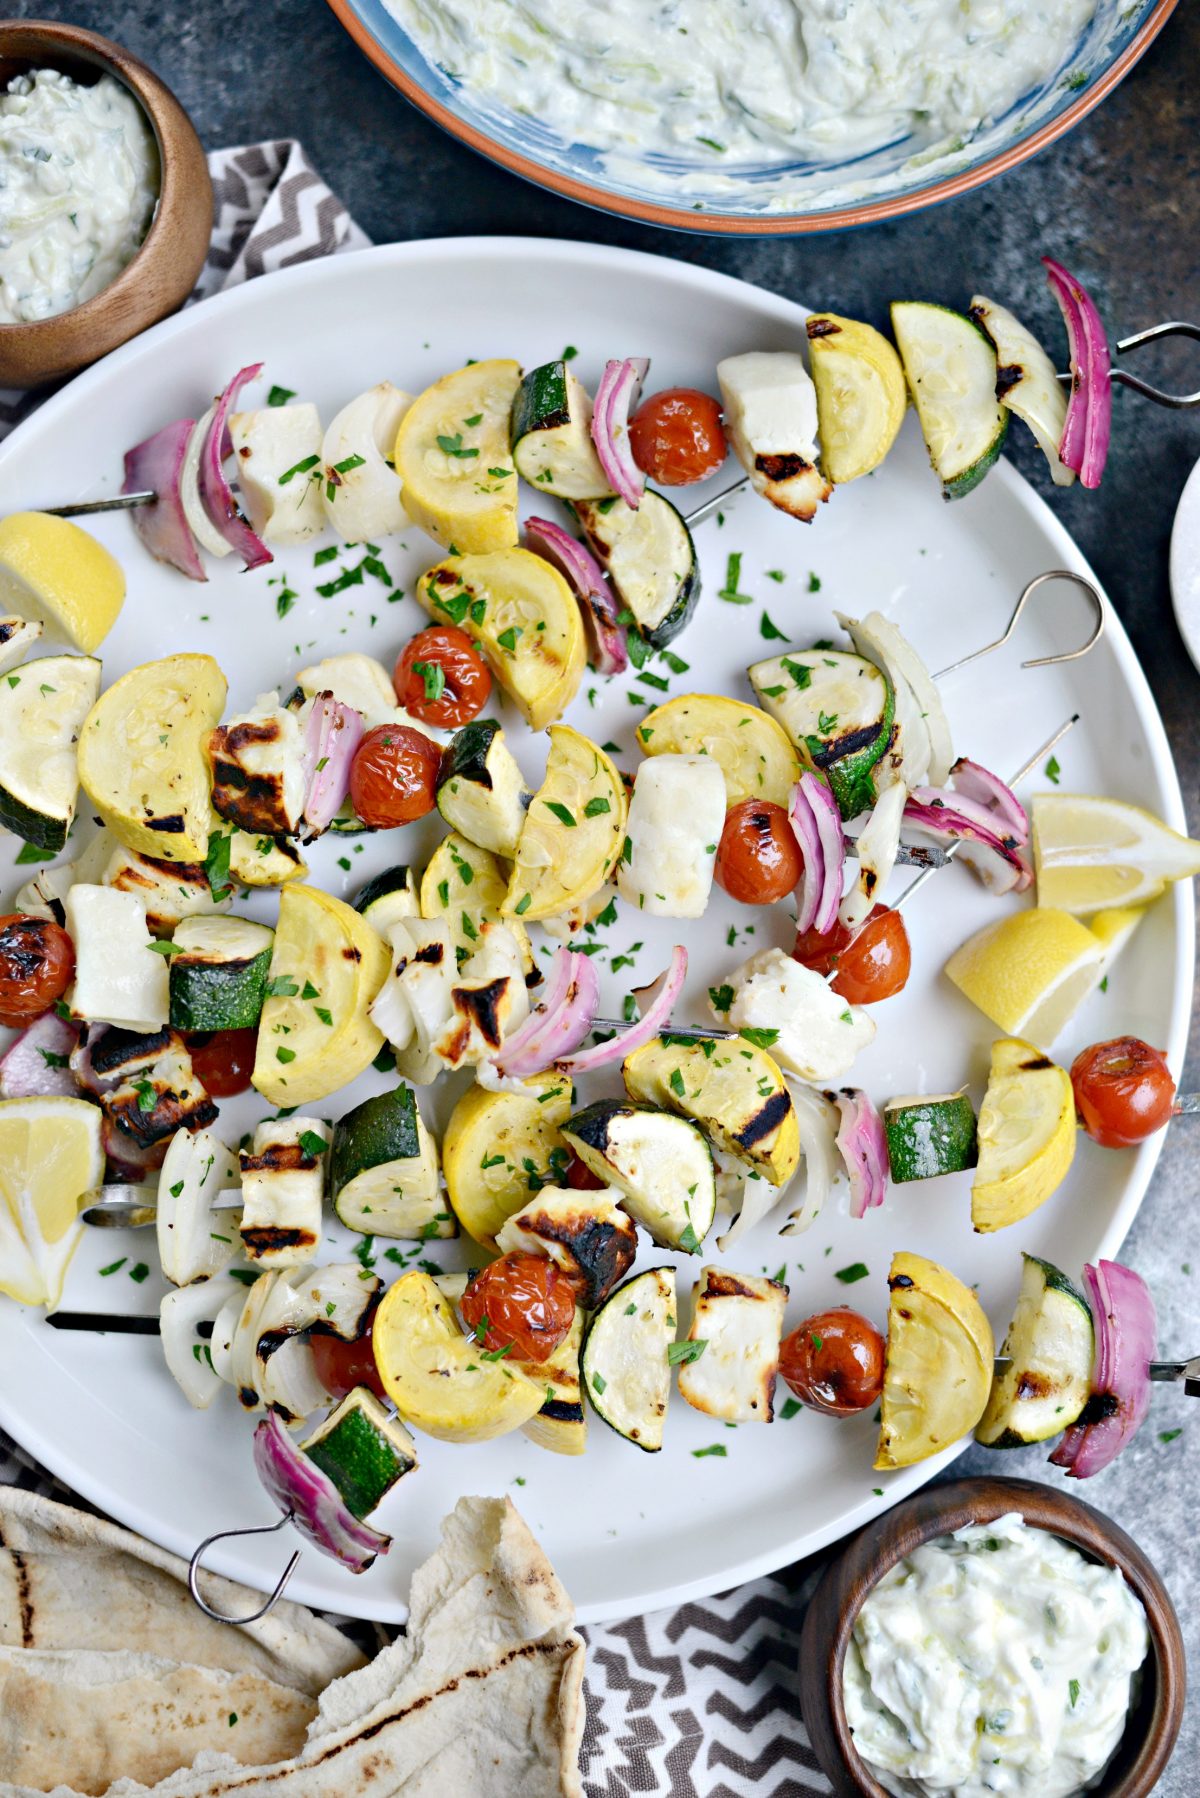 Grilled Halloumi Vegetable Skewers